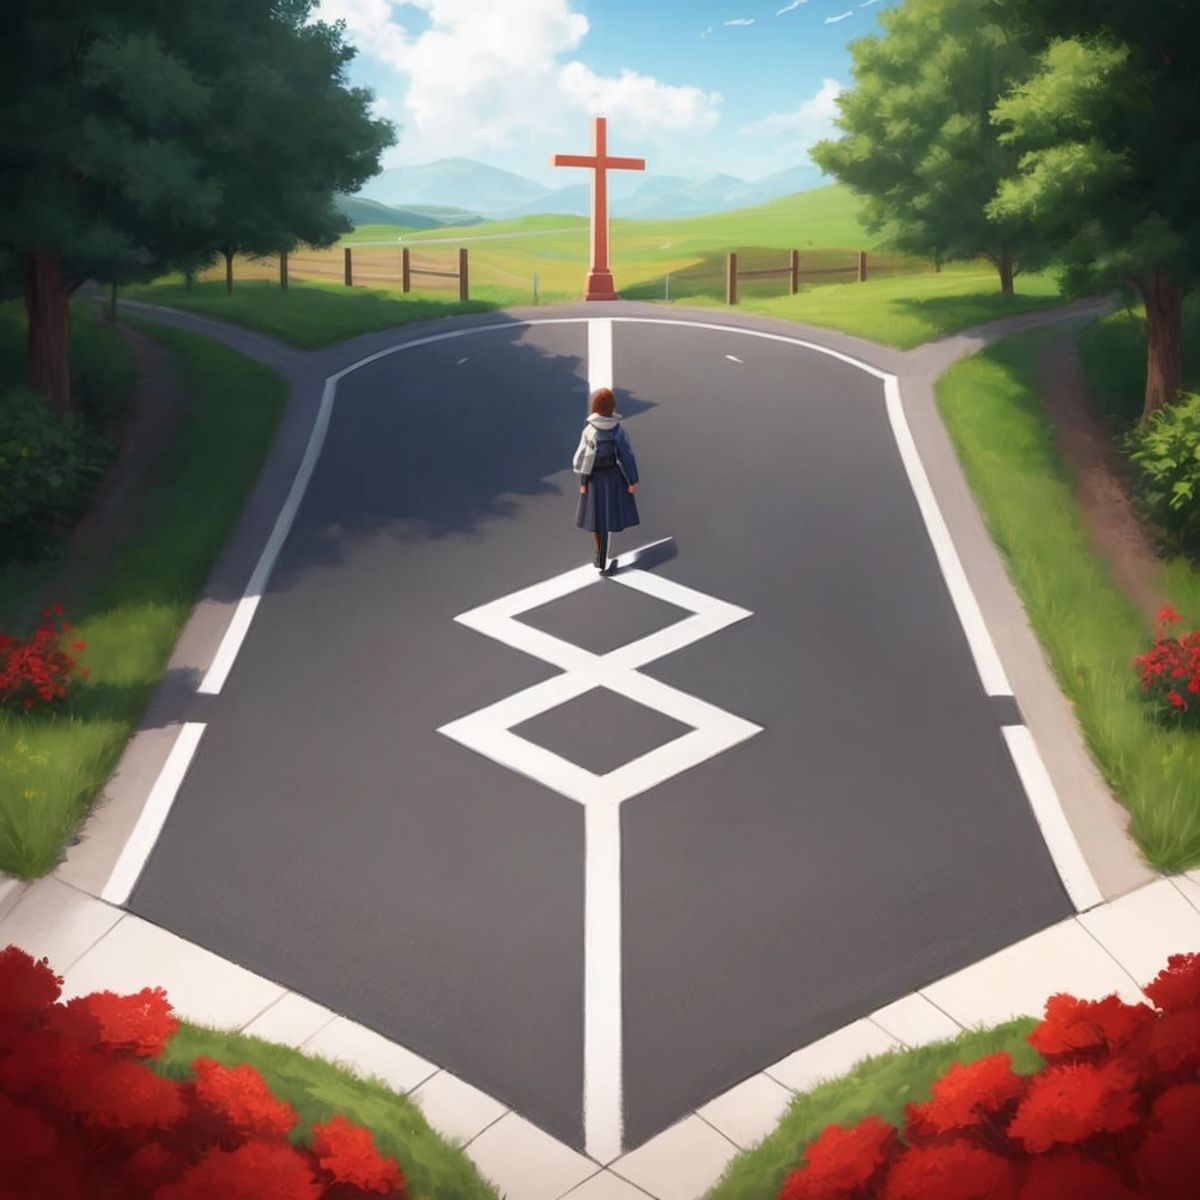 A crossroad symbolizing choices and temptations